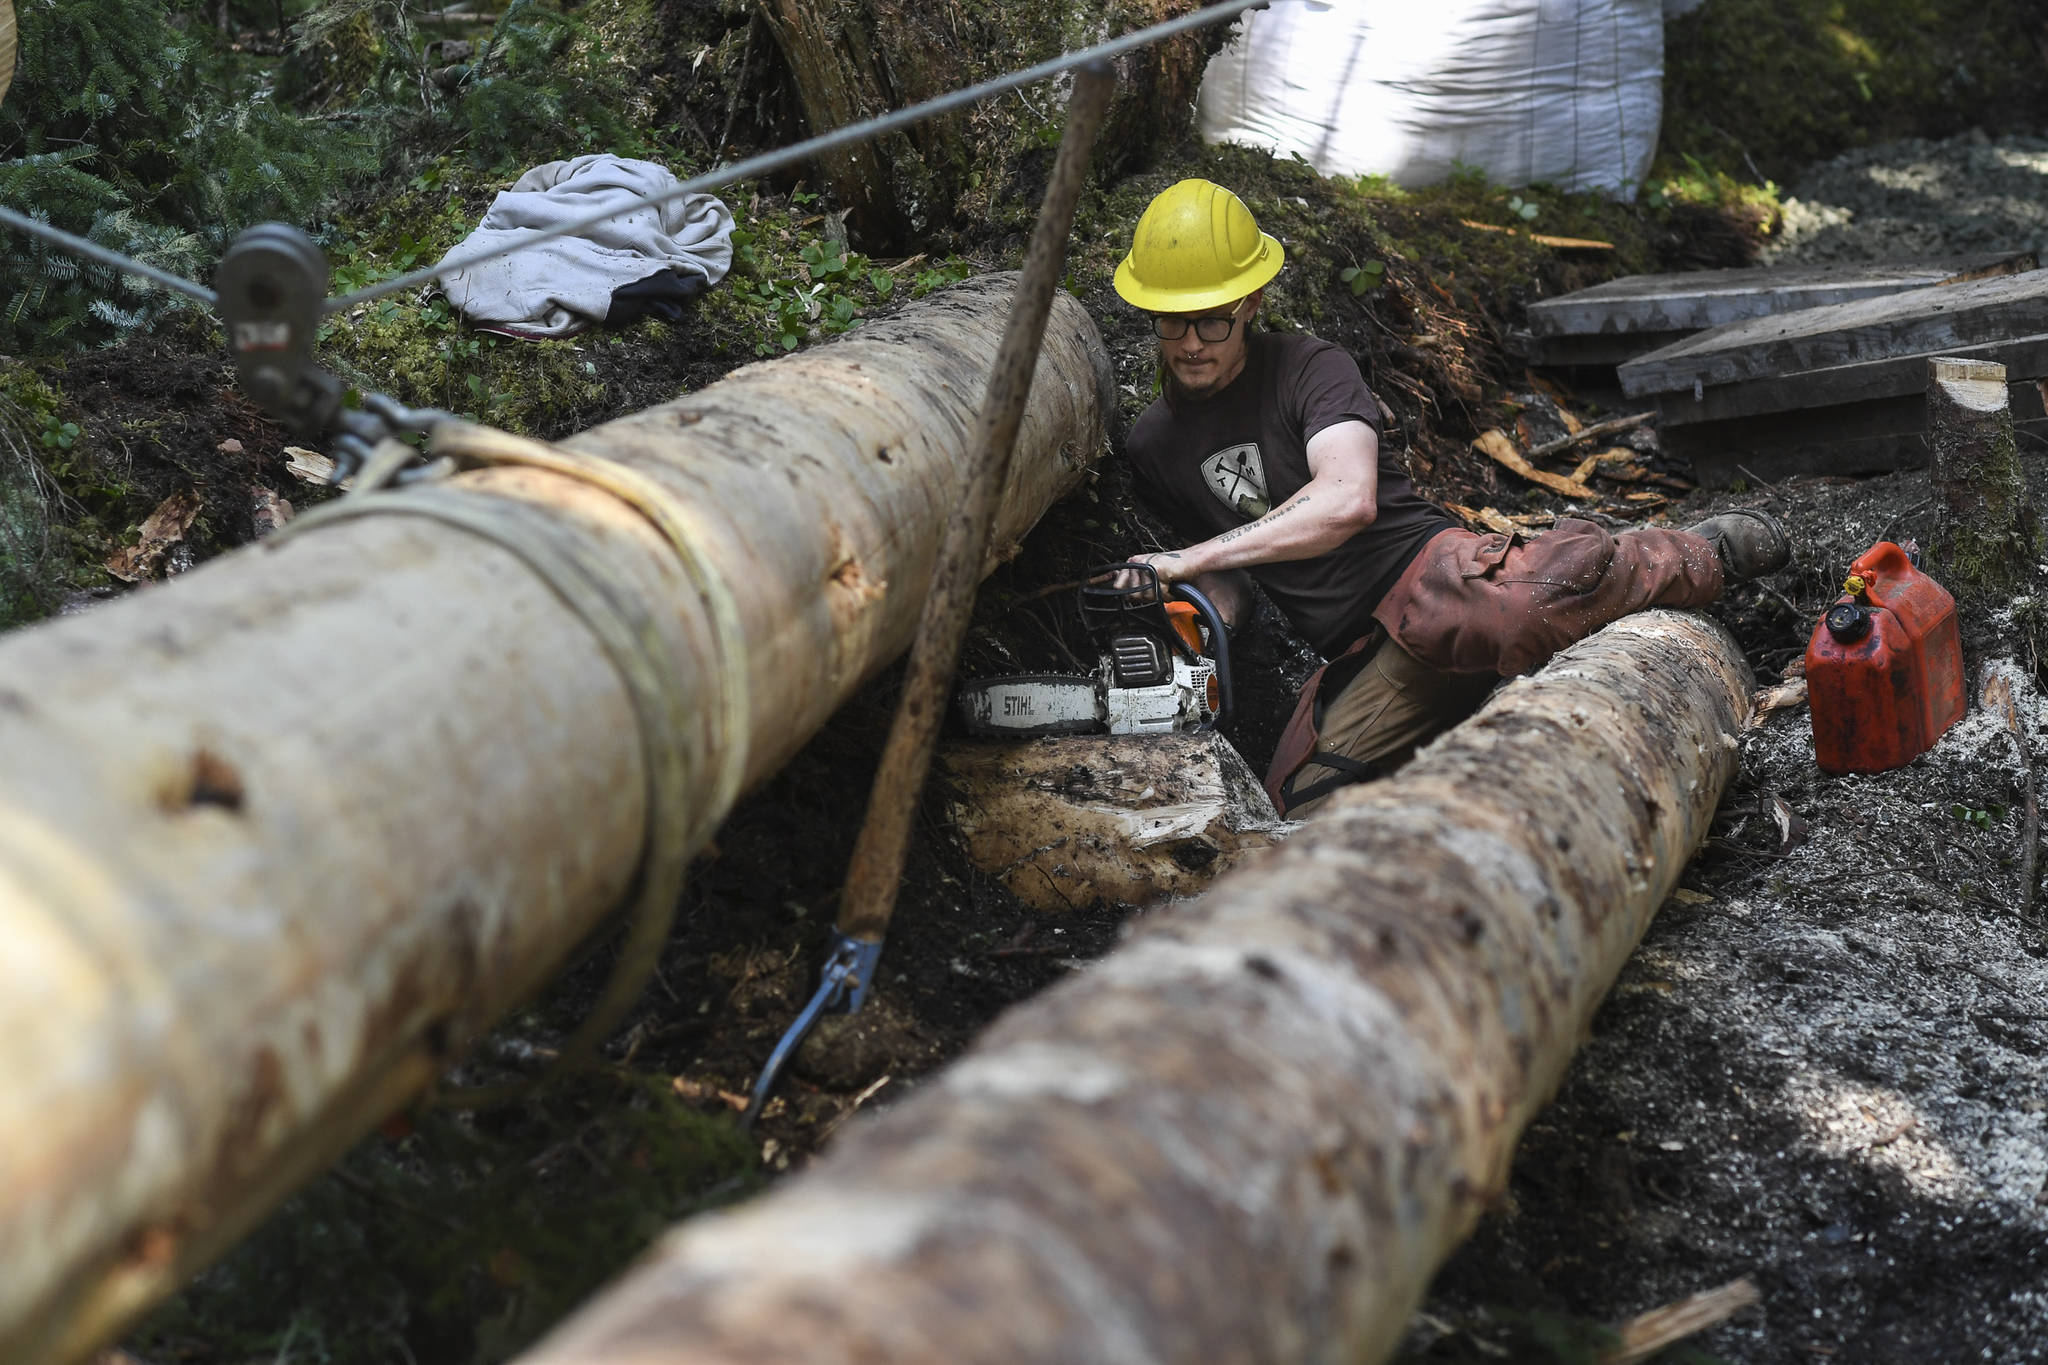 Duncan Campbell, of Trail Mix, works on a log bridge for a new Treadwell Gorge reroute trail on the Treadwell Ditch Trail on Thursday, Aug. 8, 2019. (Michael Penn | Juneau Empire)